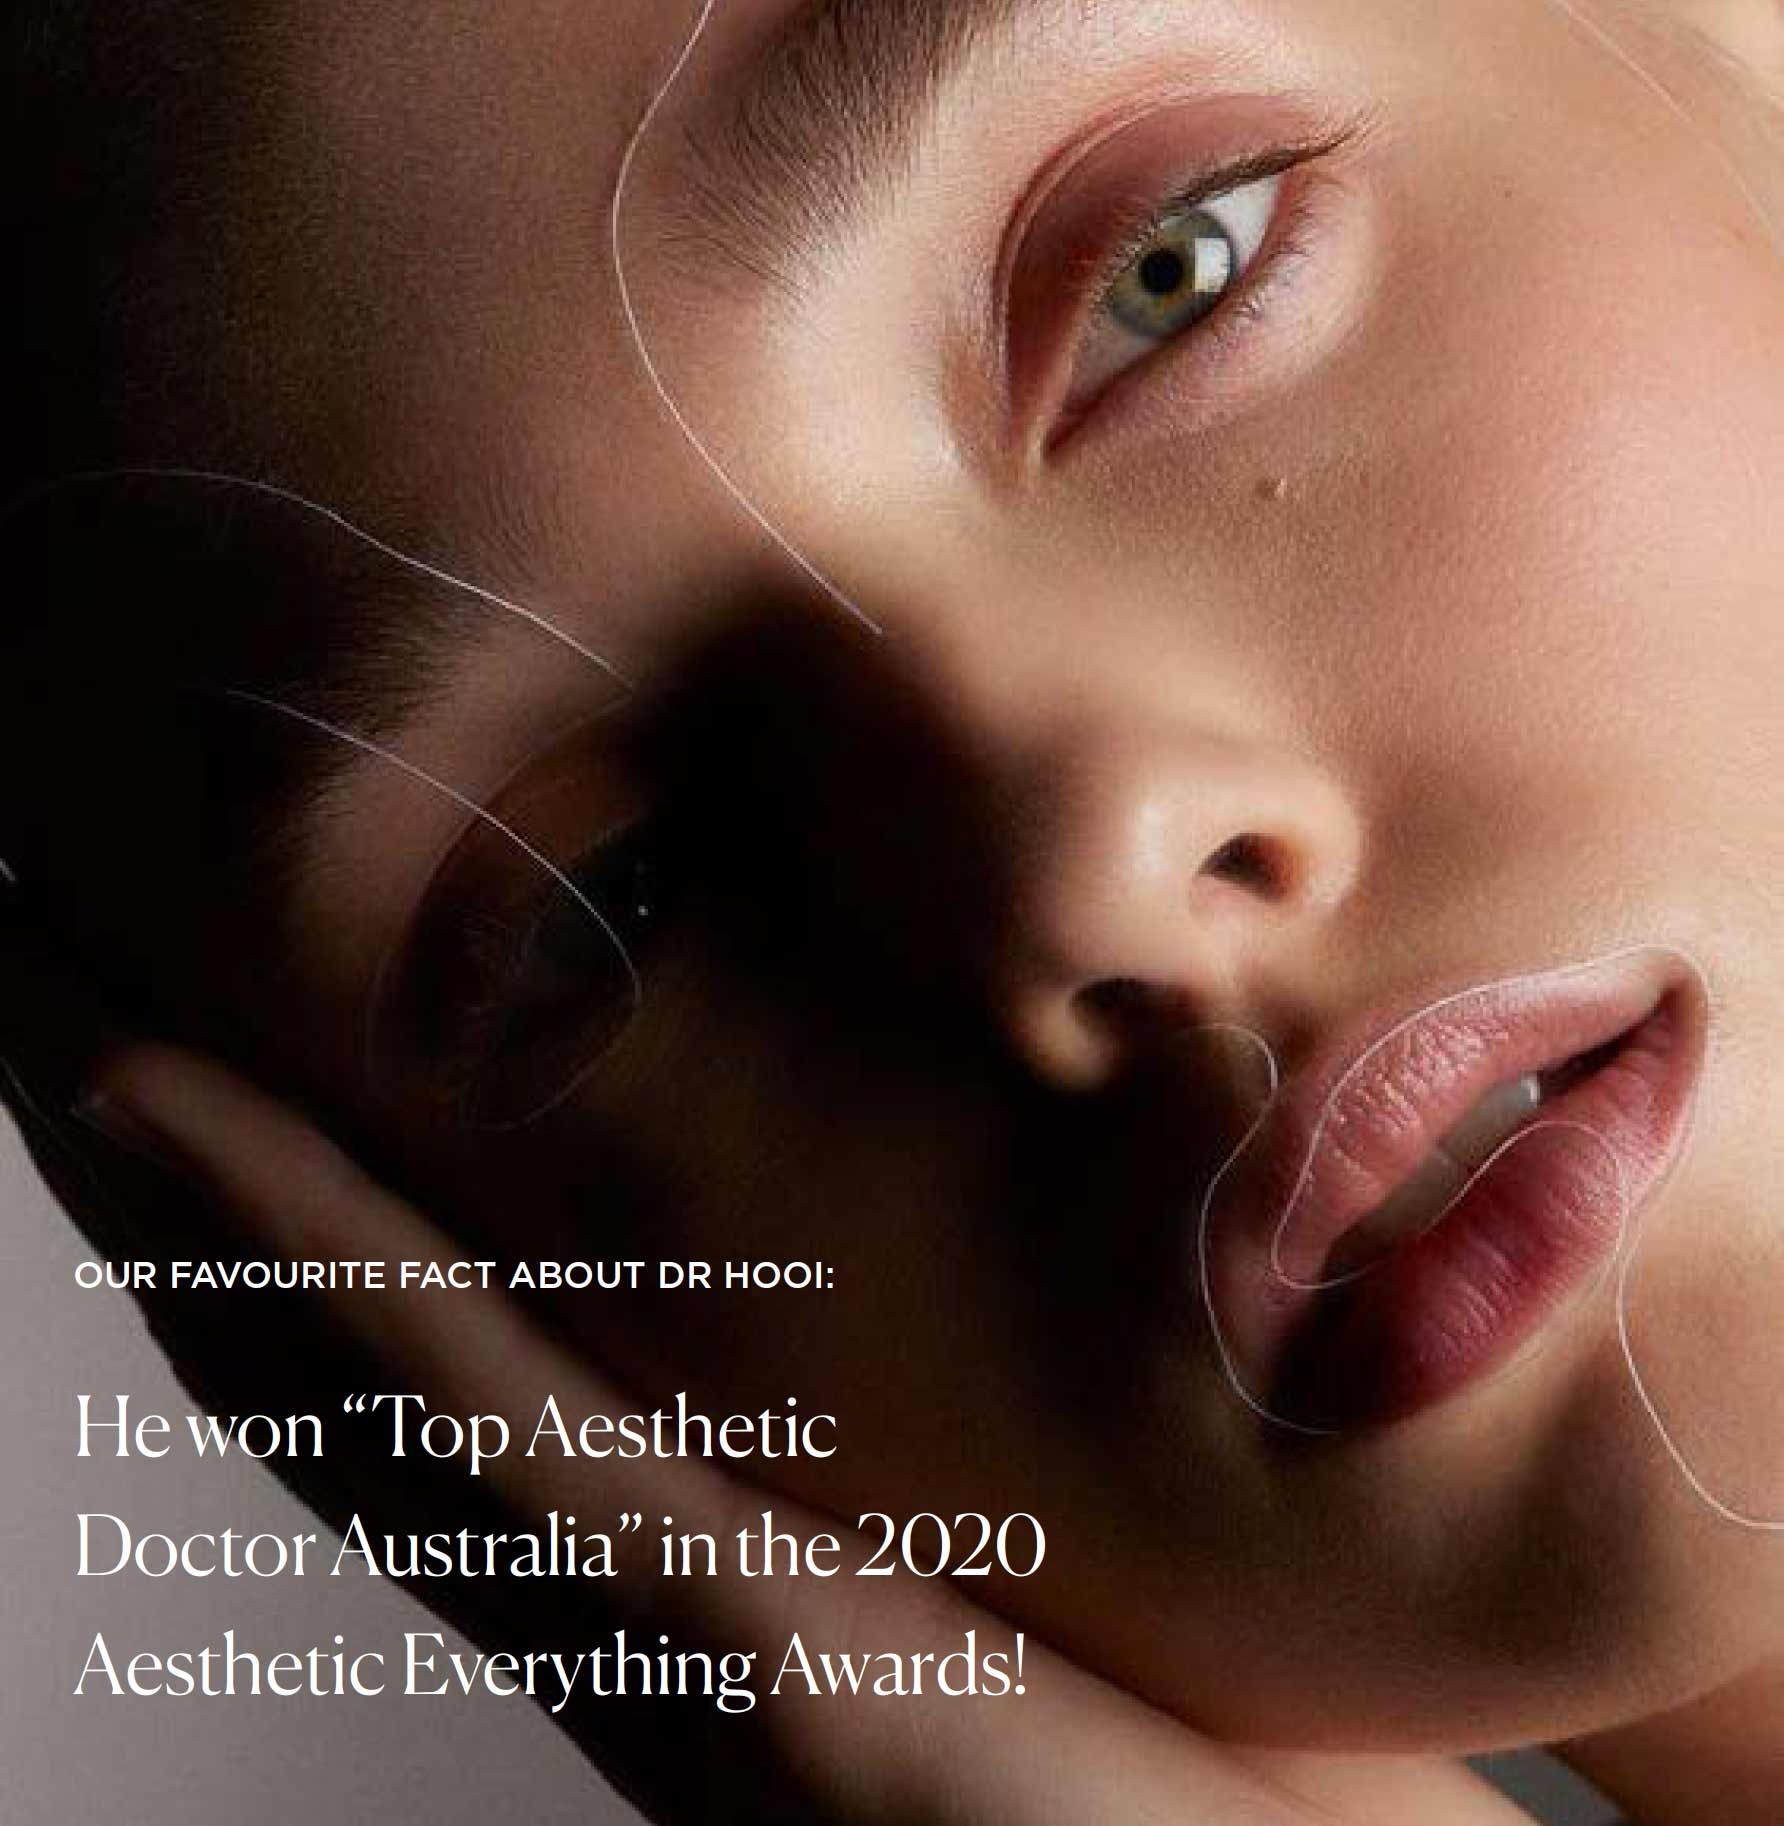 OUR FAVOURITE FACT ABOUT DR HOOI: He won Top Aesthetic Doctor Australia in the 2020 Aesthetic Everything Awards!